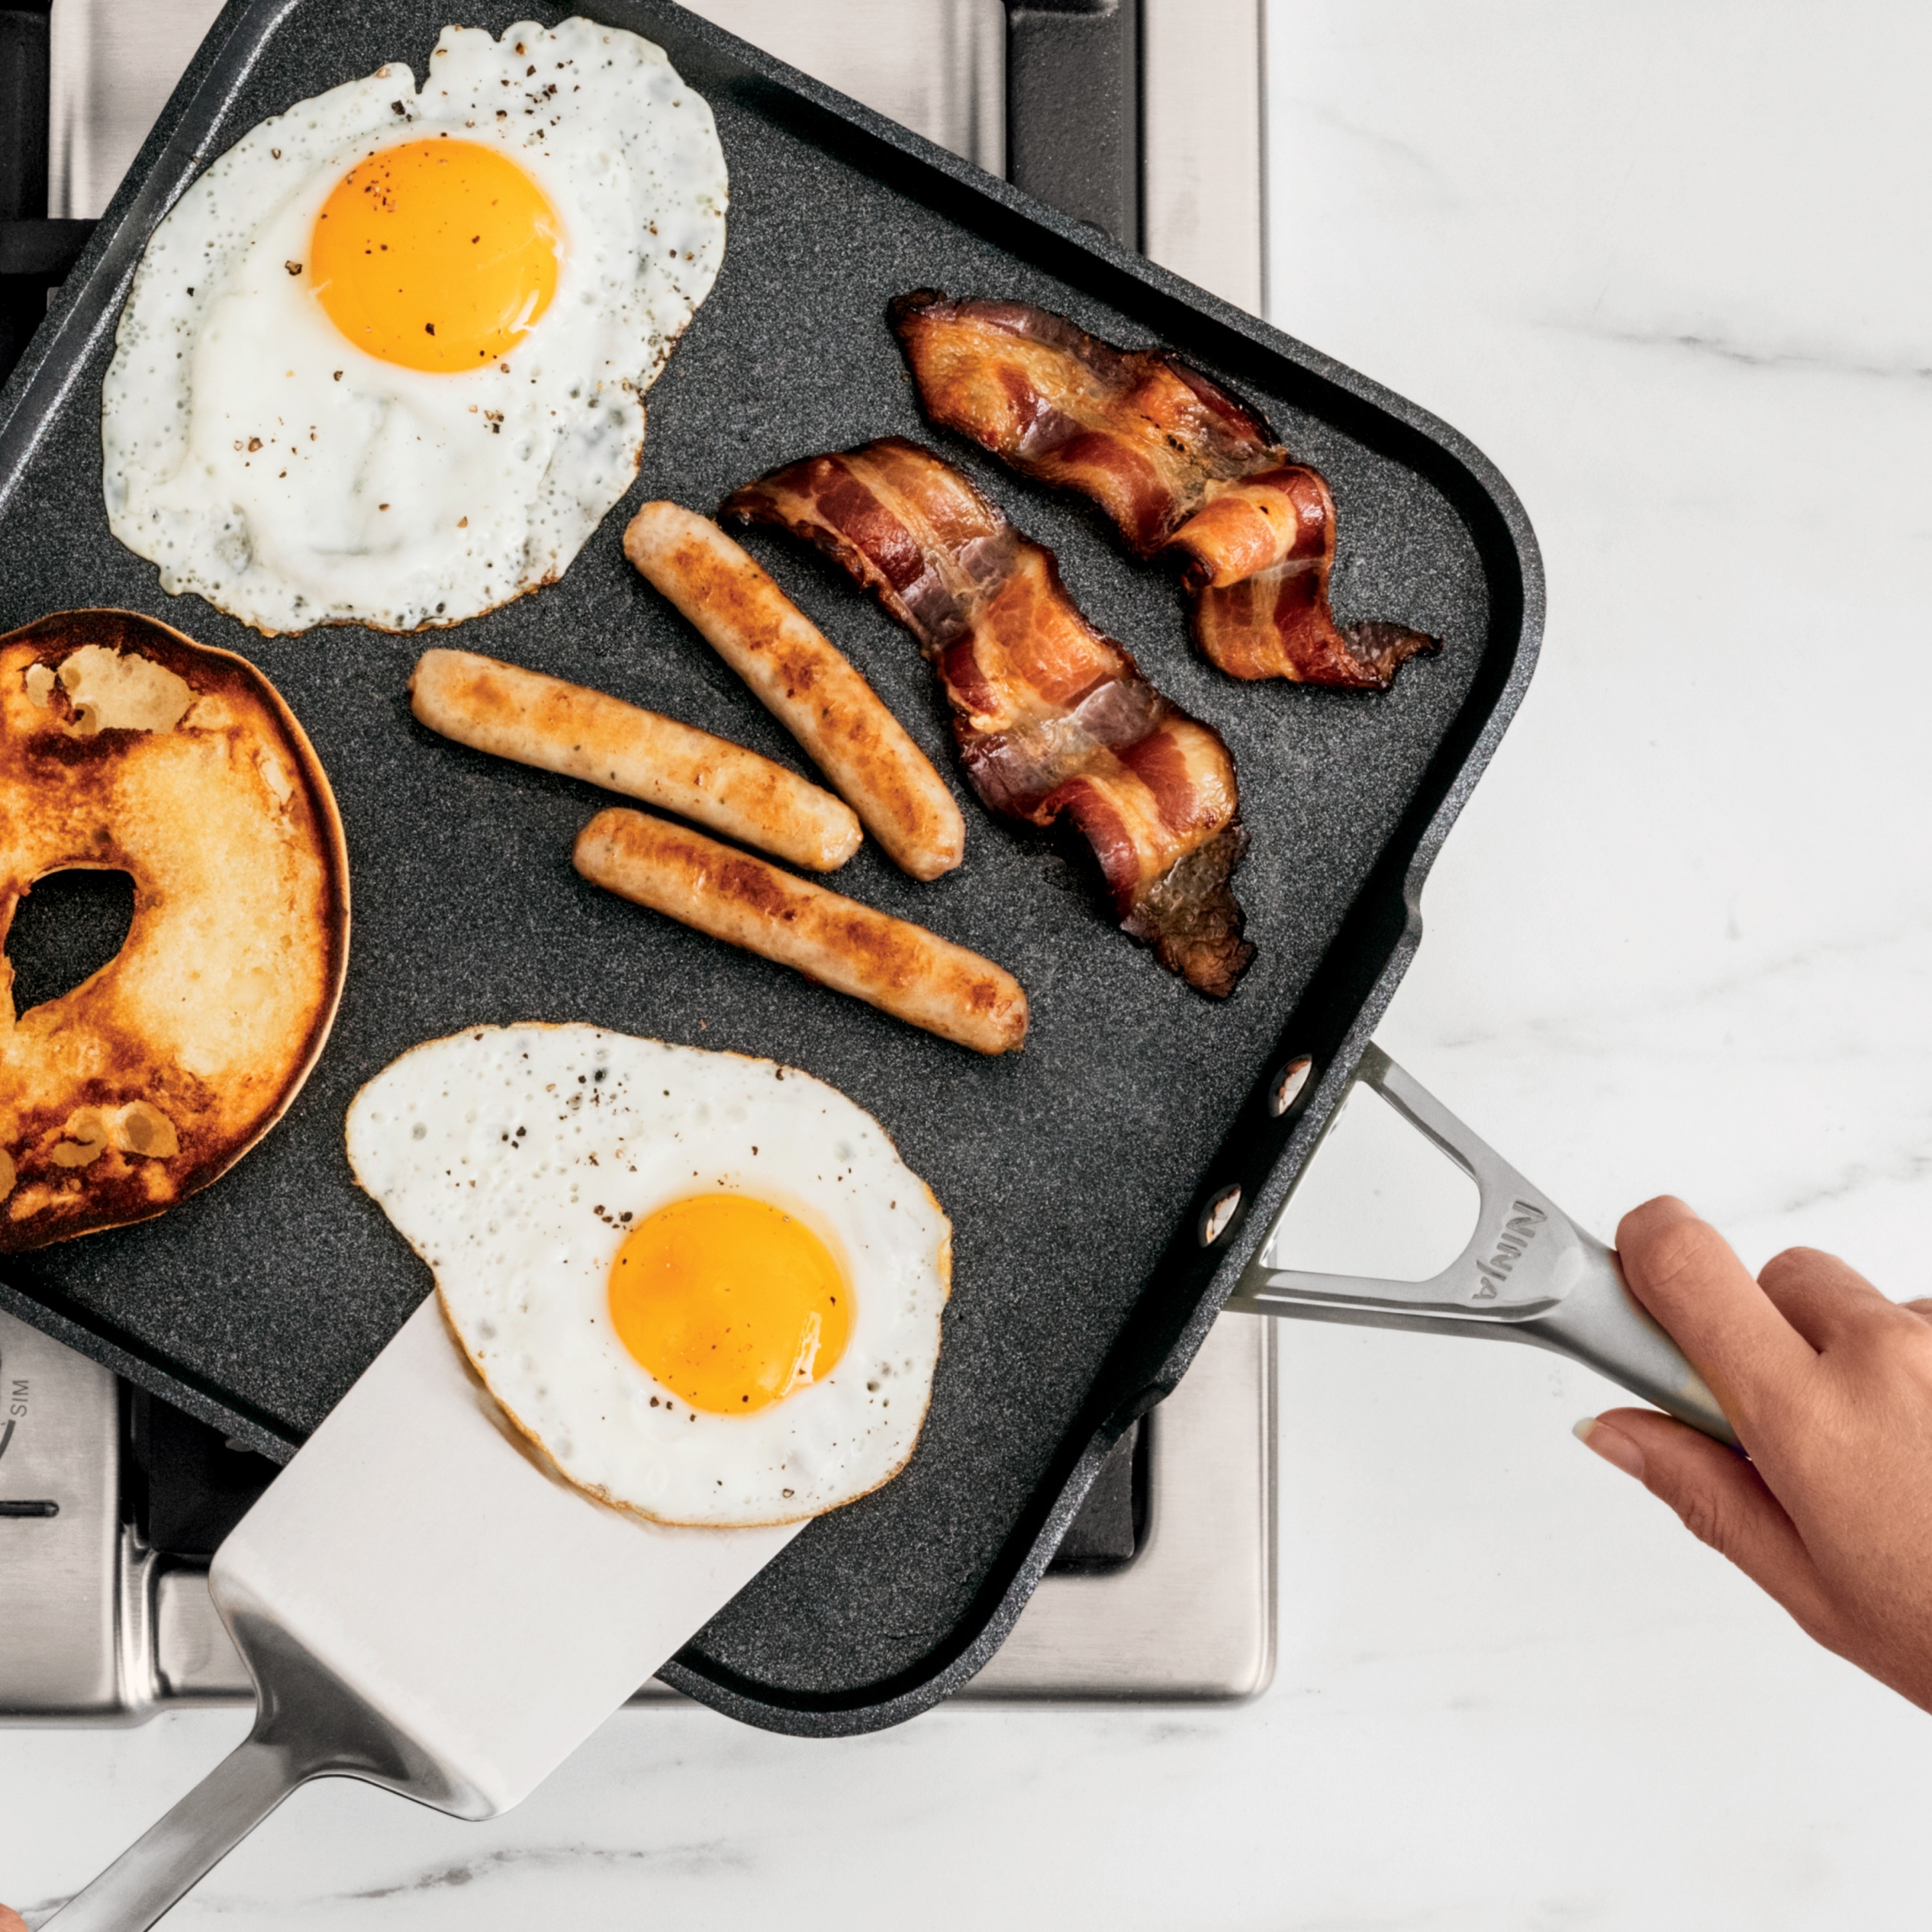 Nutrichef Cast Iron Square Skillet Grill Pan